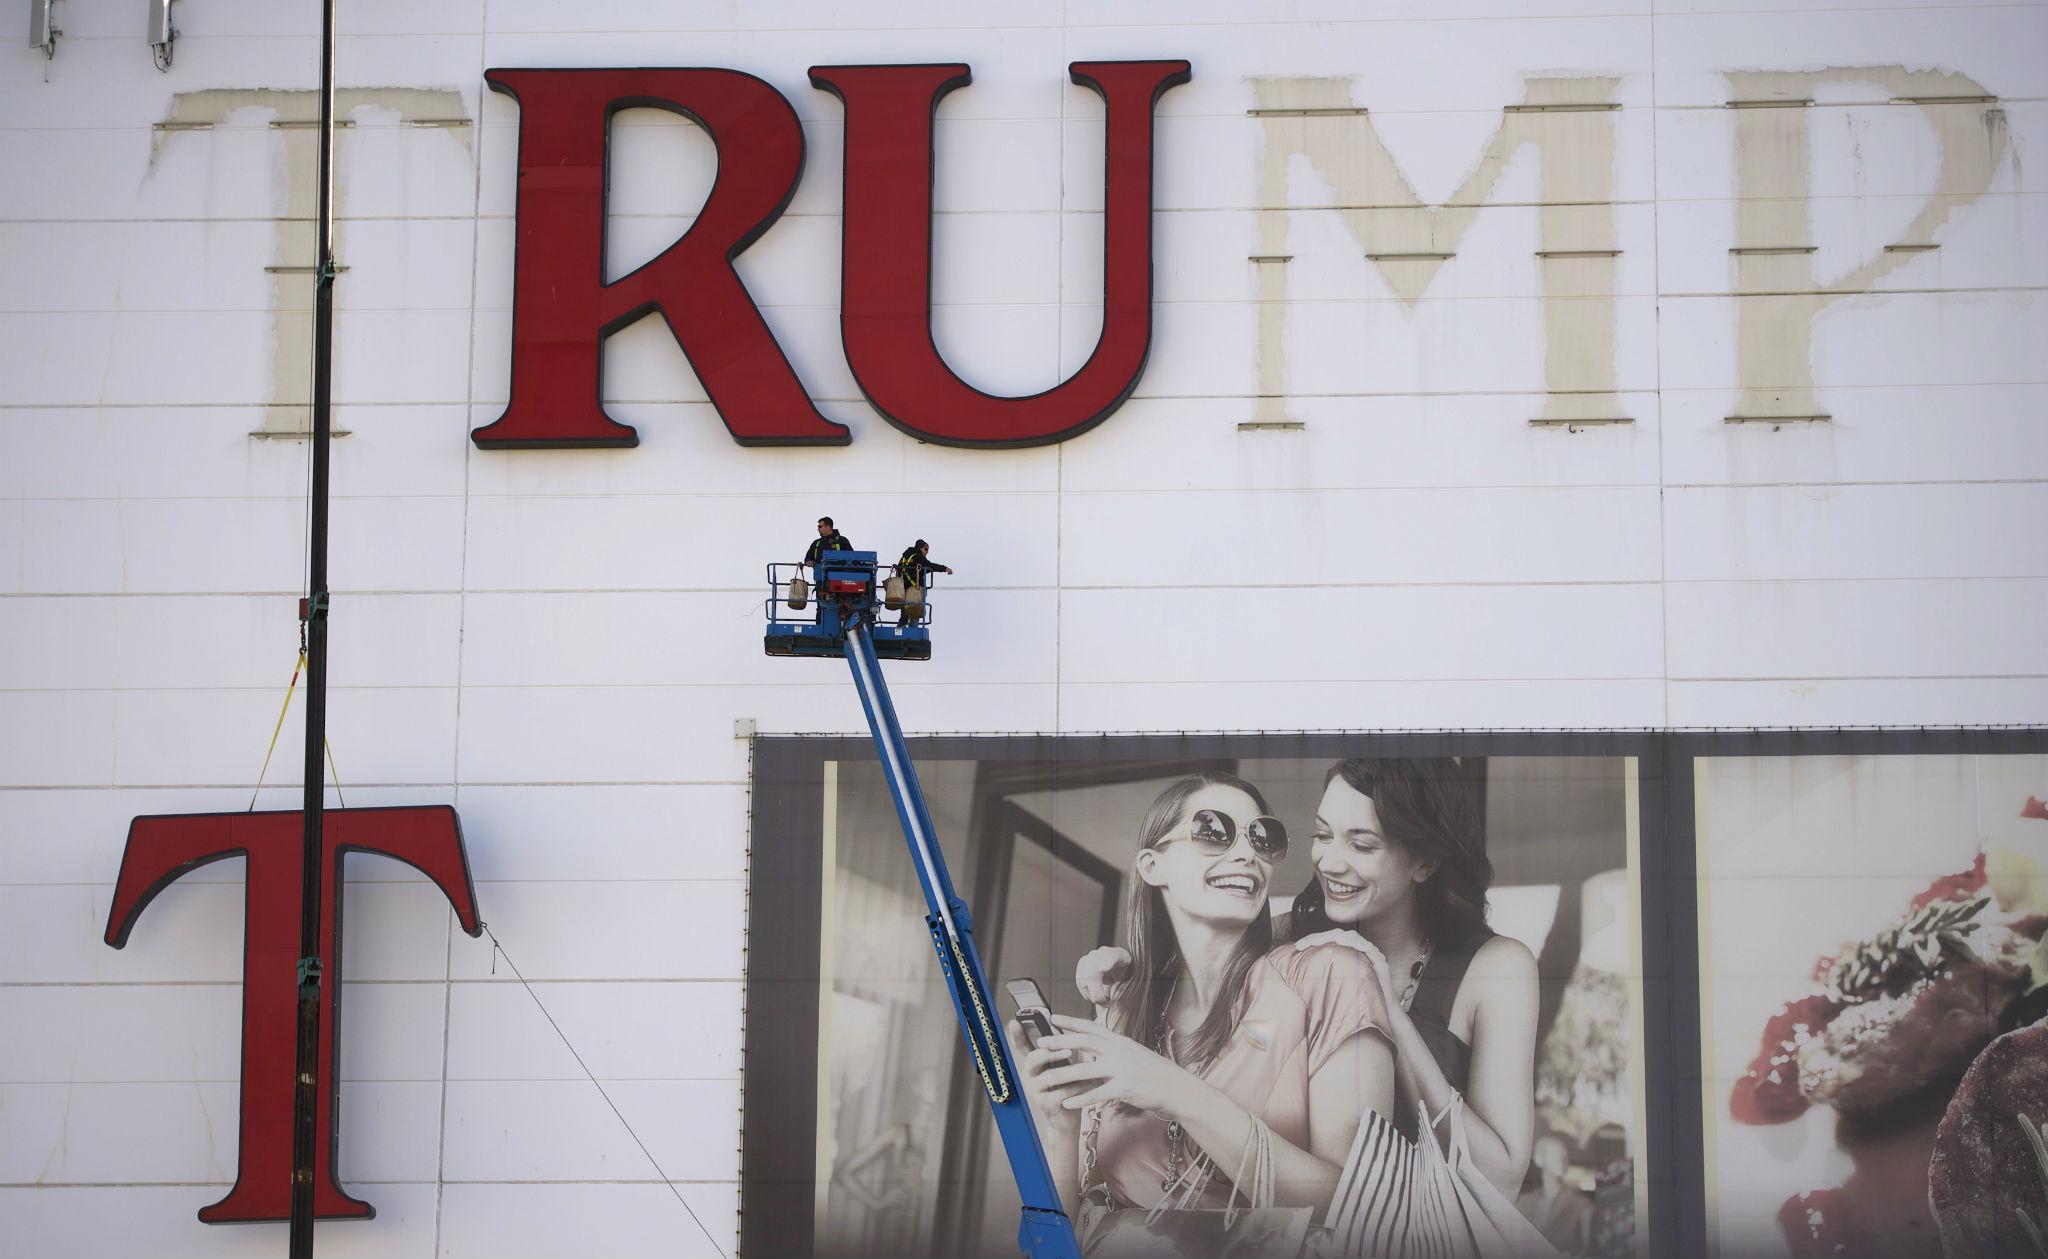 Trump Hotels recently announced that its next chain of hotels would not bear the founder’s name